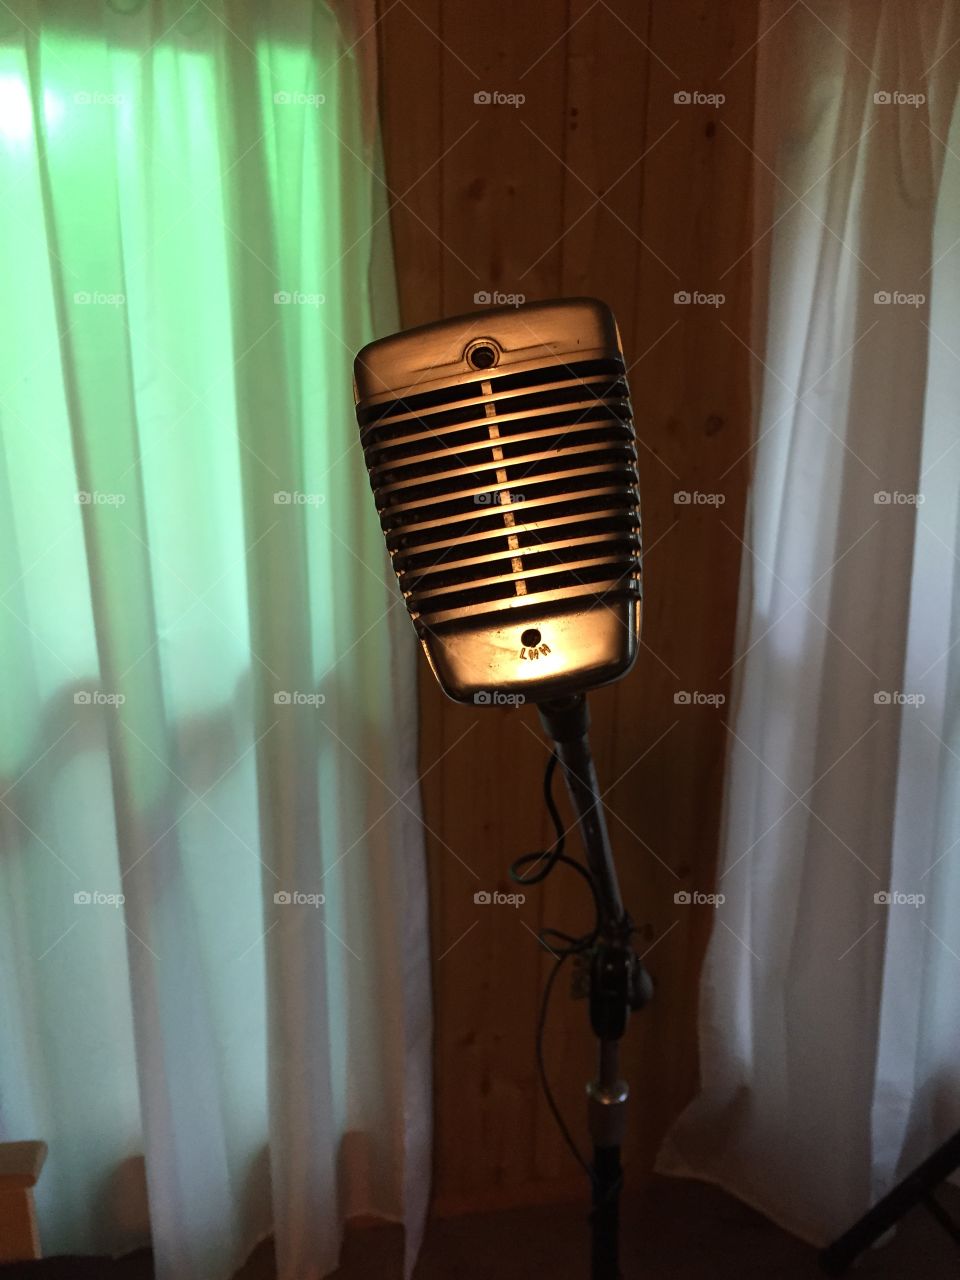 0ld time microphone from the 50's 60's used by singers.